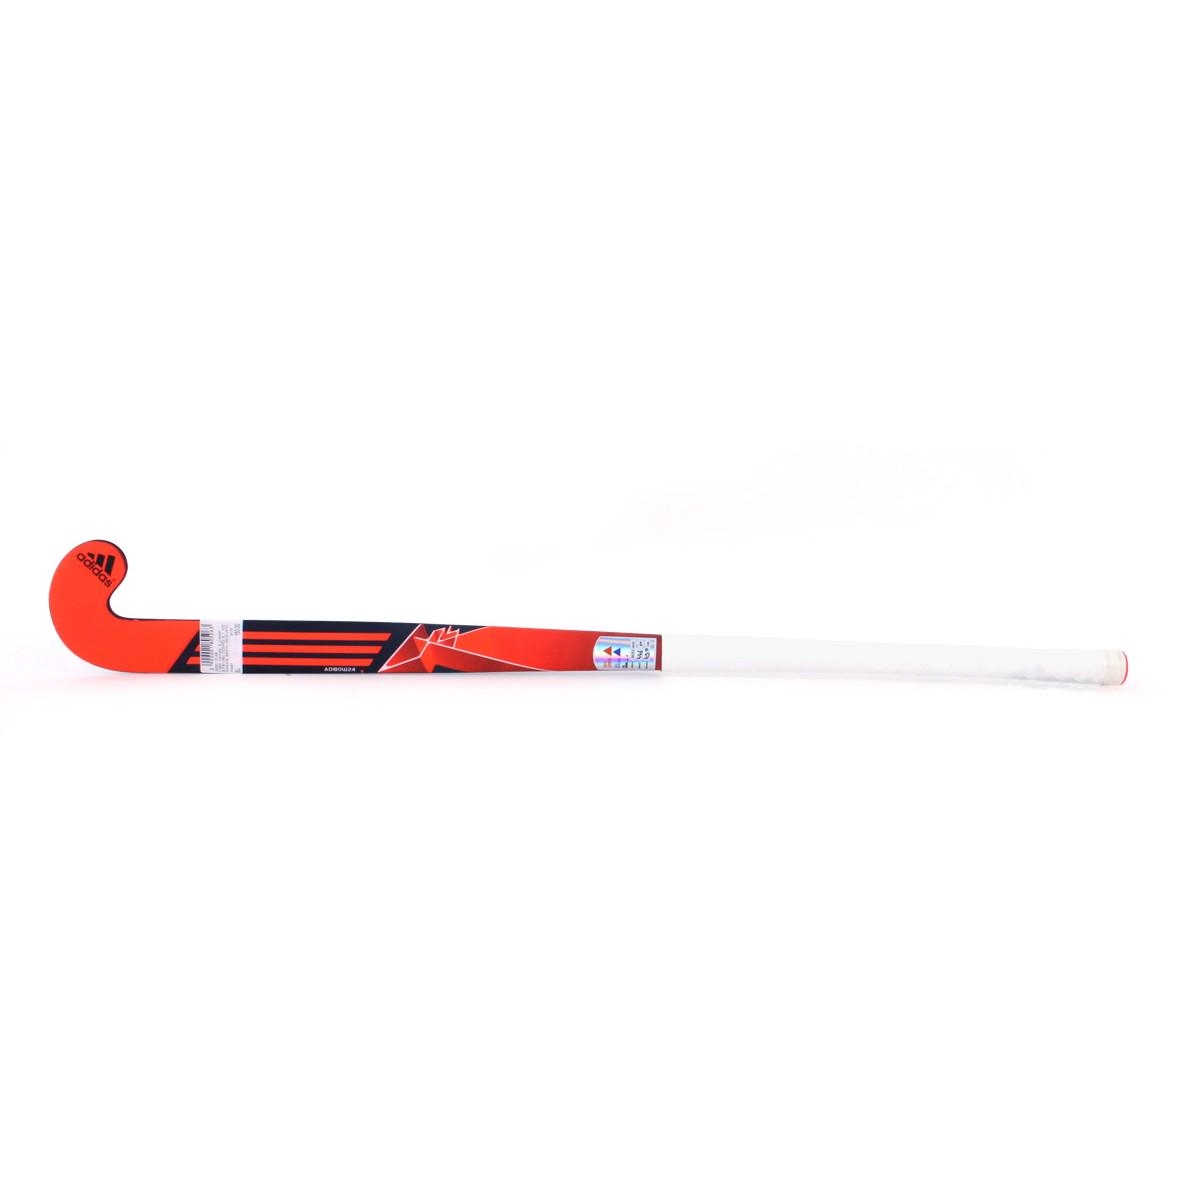 Tijdreeksen Klacht Excursie Province Sports on Twitter: "The all new Adidas LX24 Compo 2 Indoor stick  for R1590 http://t.co/1czNIeGF2b" / Twitter